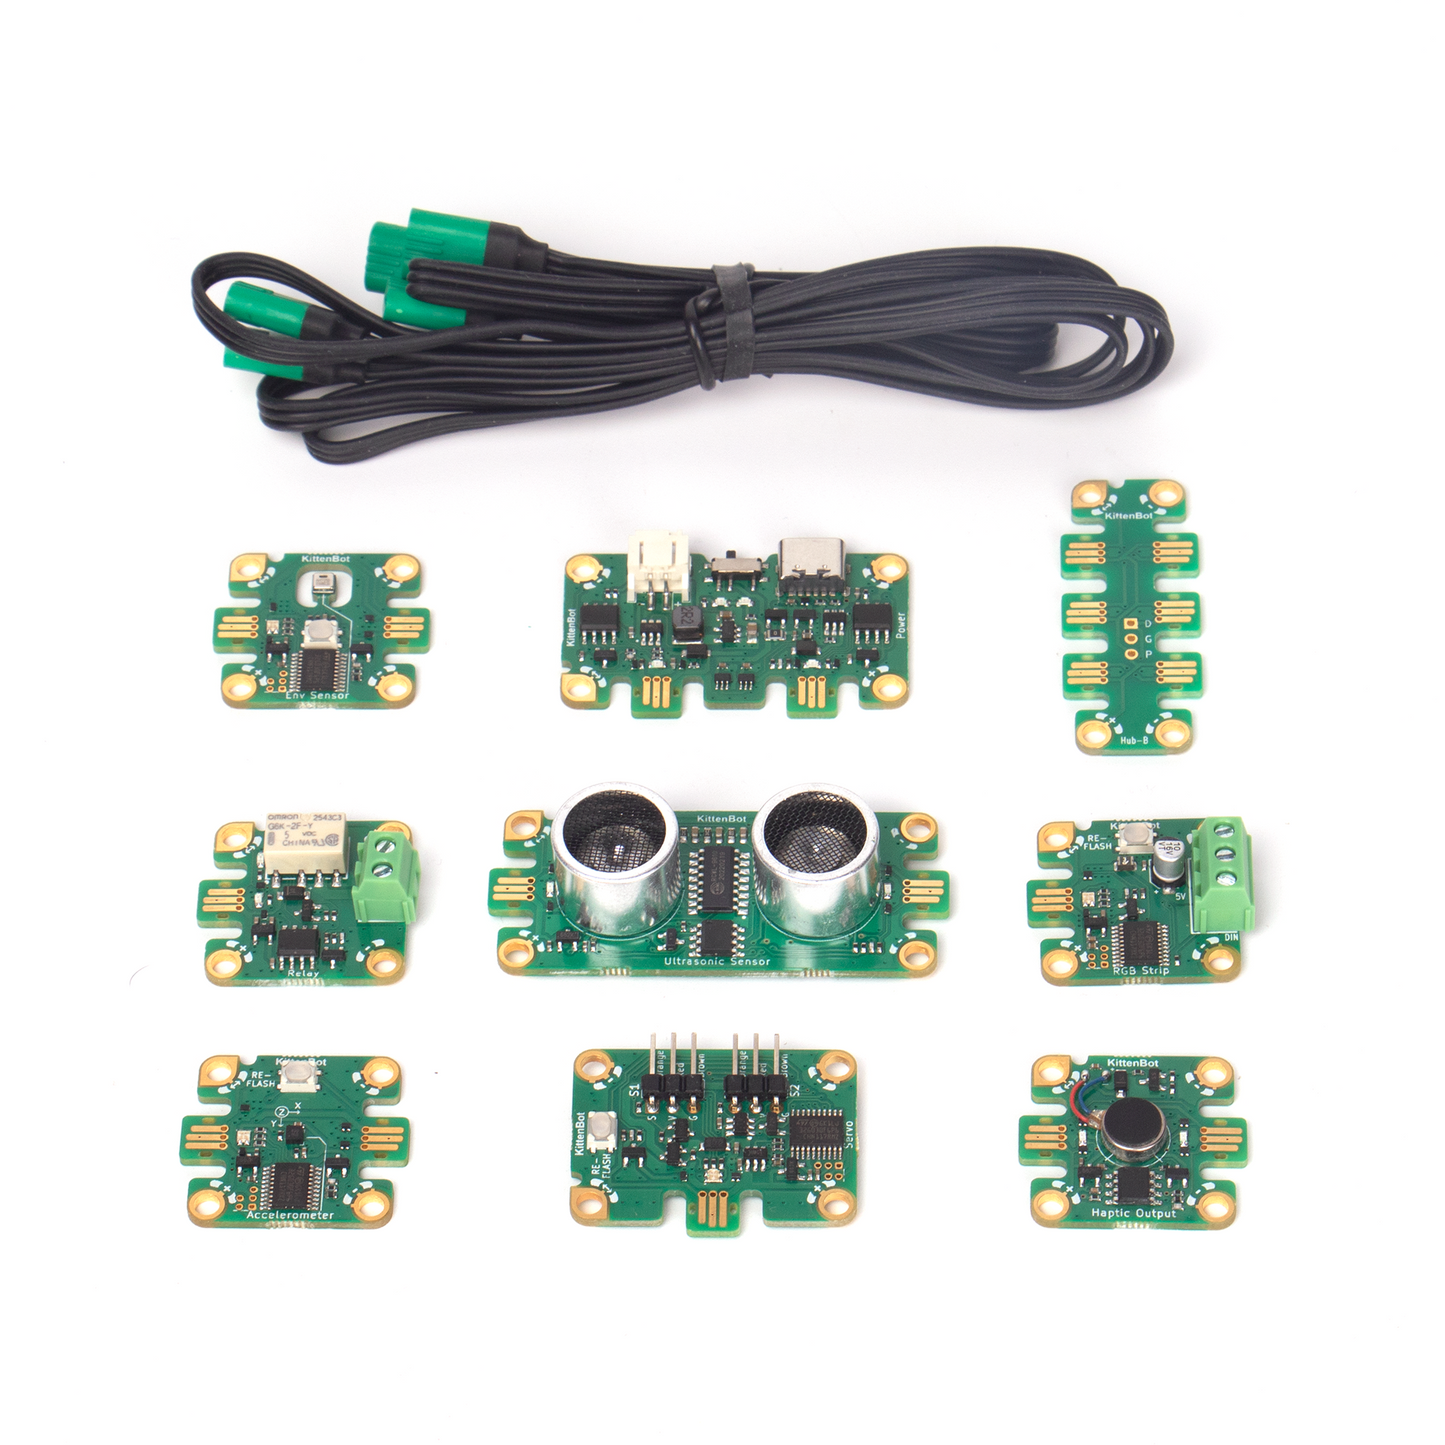 Jacdac Electronic Kit B for Developer (Including Jacdac cables)